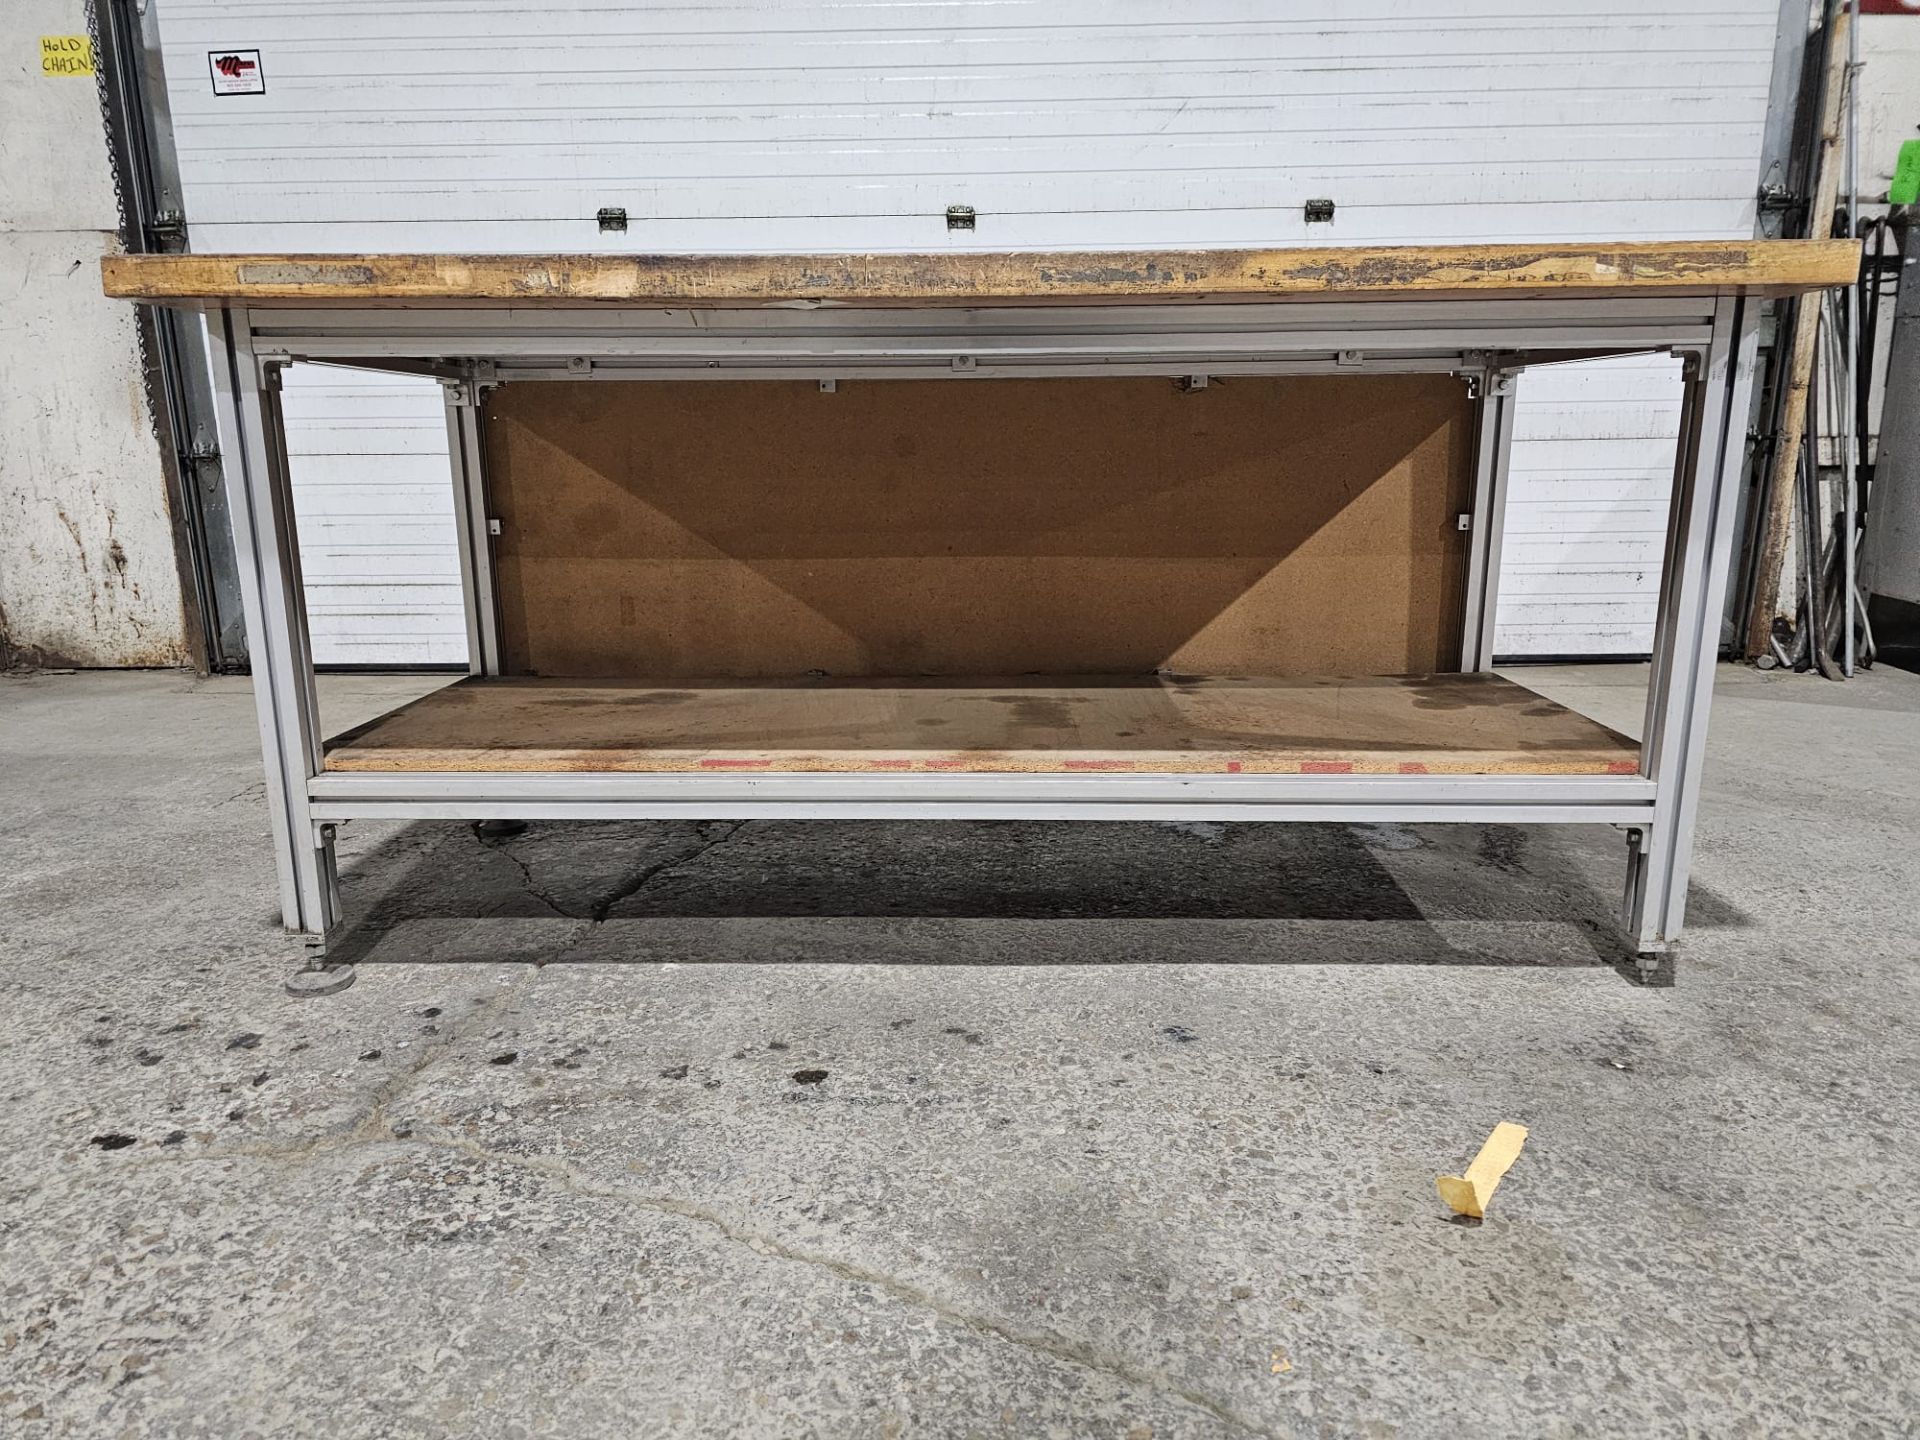 Table 36" x 72" x 34.5"h bottom shelf: 24" w x 69" - Aluminum frame with wooden top